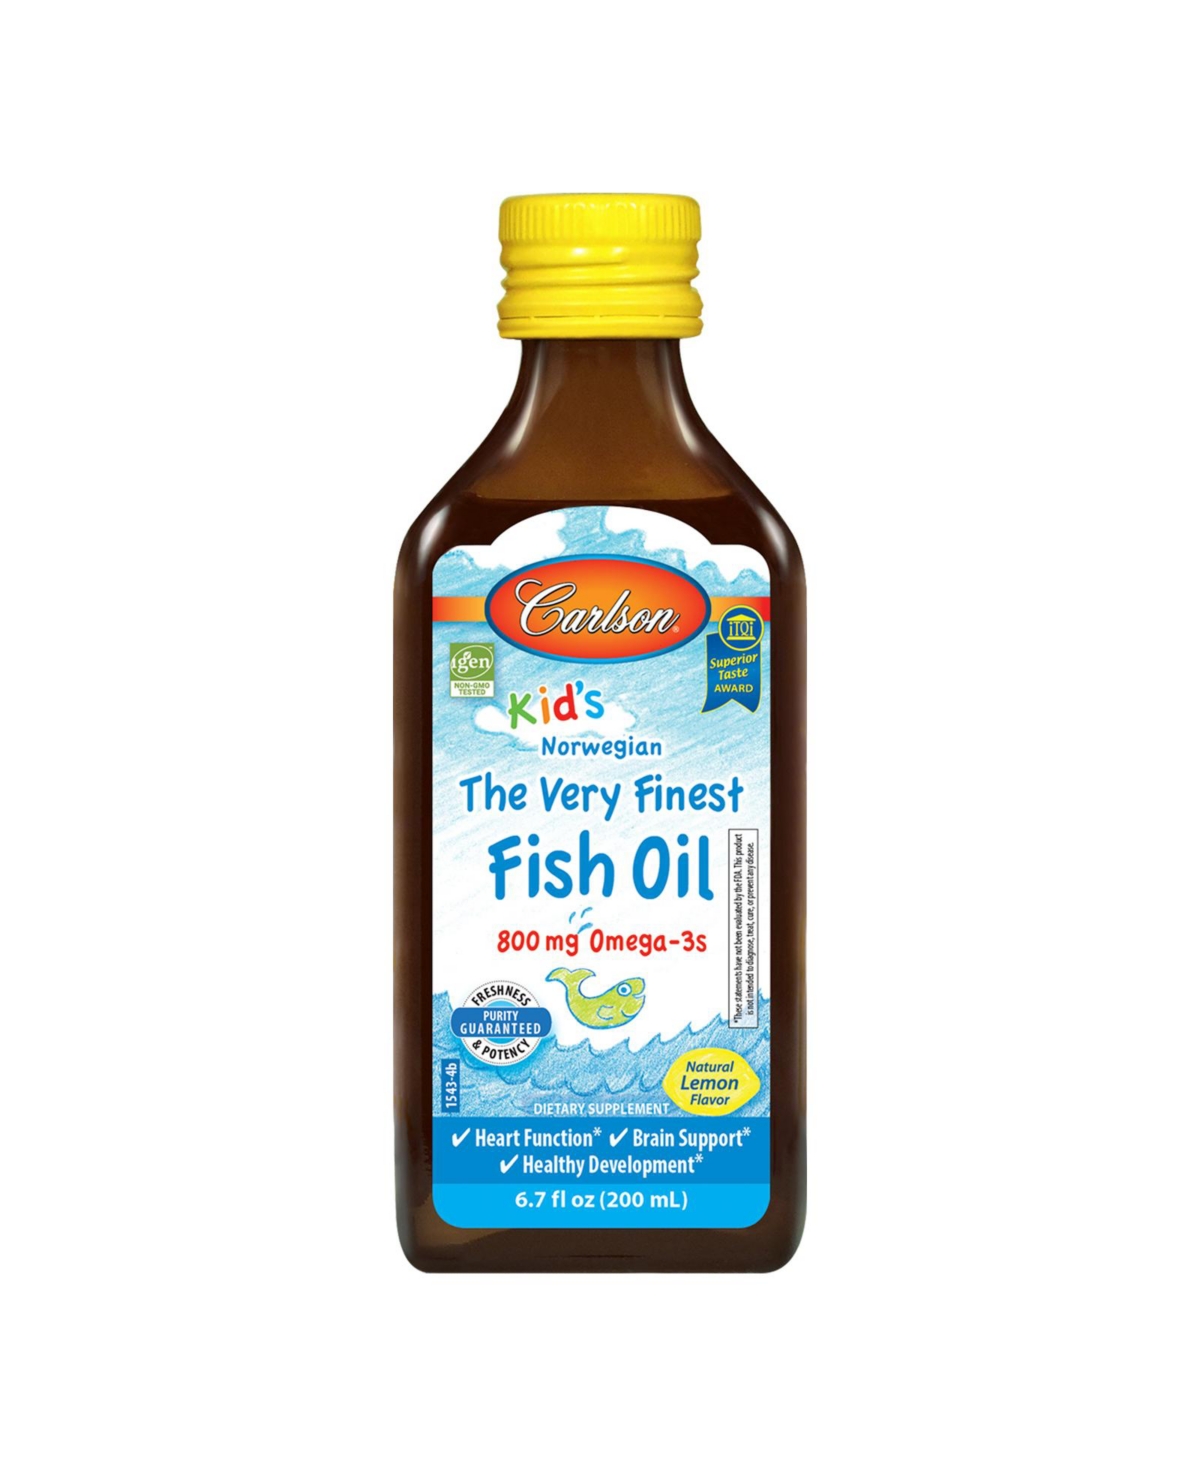 Carlson - Kid's The Very Finest Fish Oil, 800 mg Omega-3s, Norwegian, Wild Caught, Sustainably Sourced, Lemon, 200 mL (6.7 fl oz)